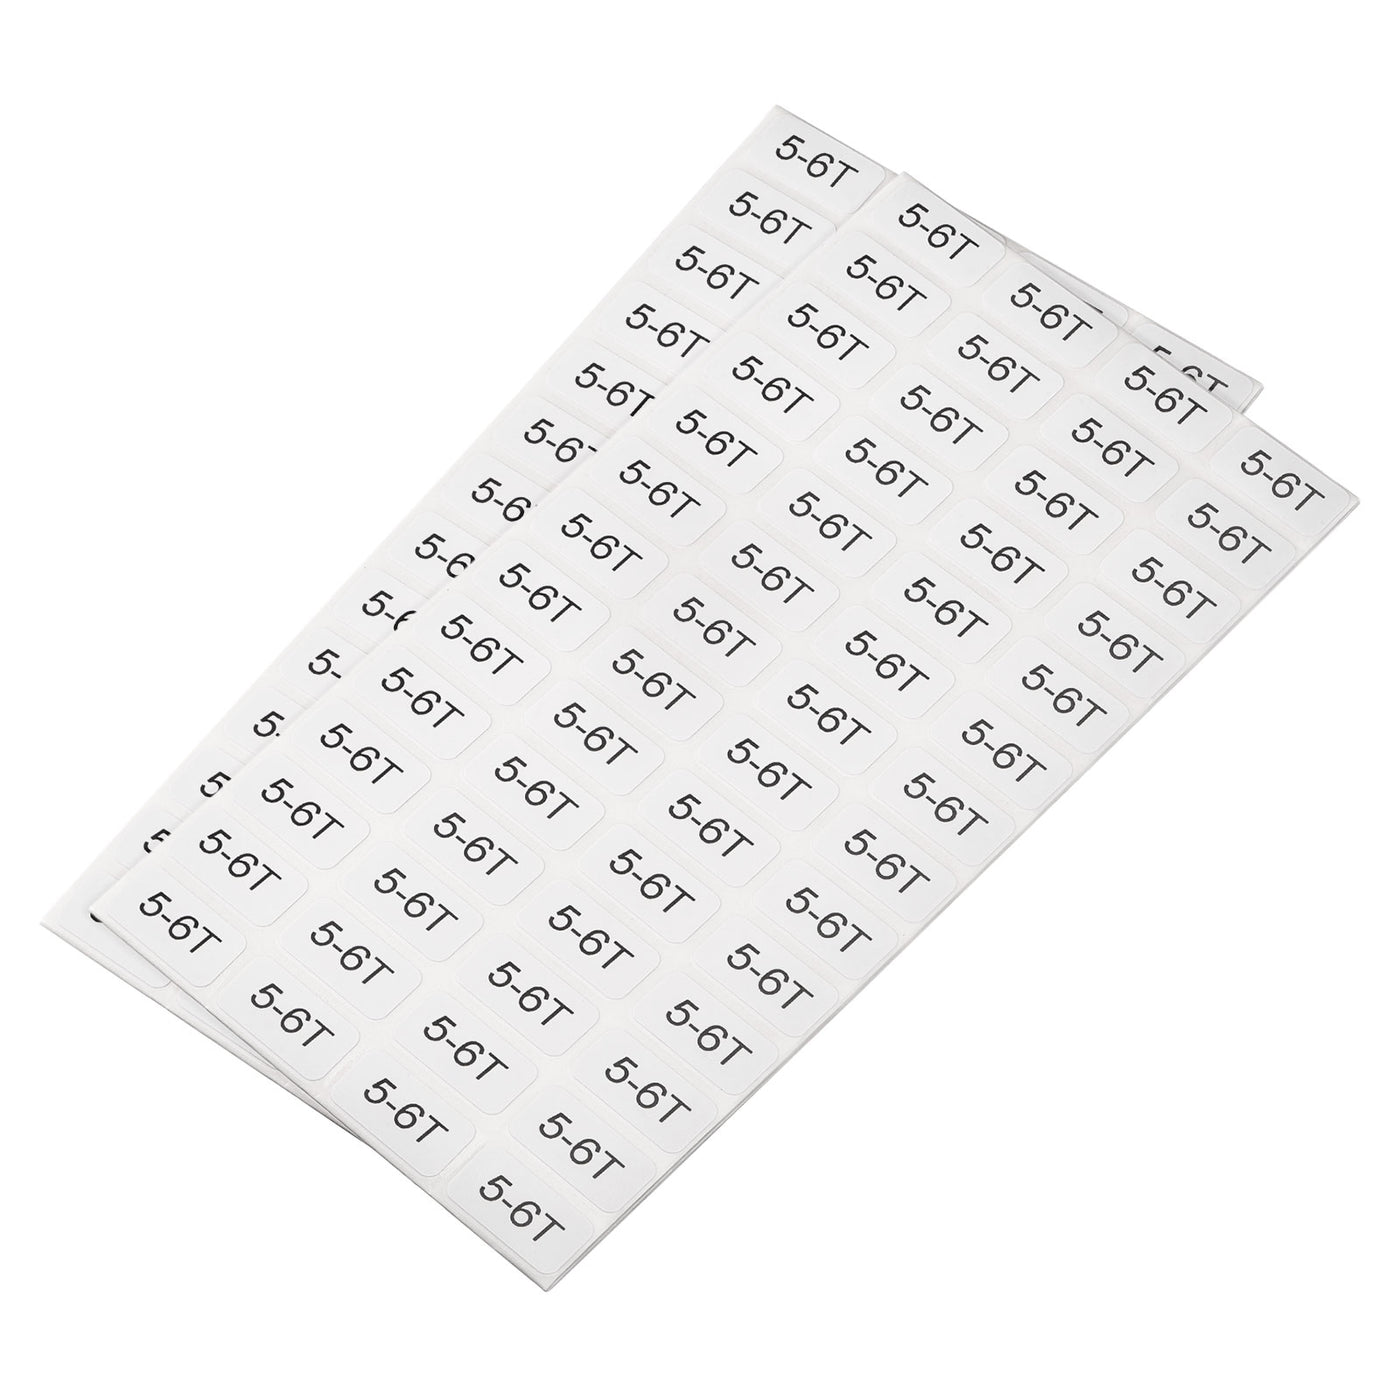 Harfington 5-6T Clothes Size Sticker Label Clothing Coding 5 to 6 Year Old Clothing Size Labels for Retail Apparel, 2 Sheet